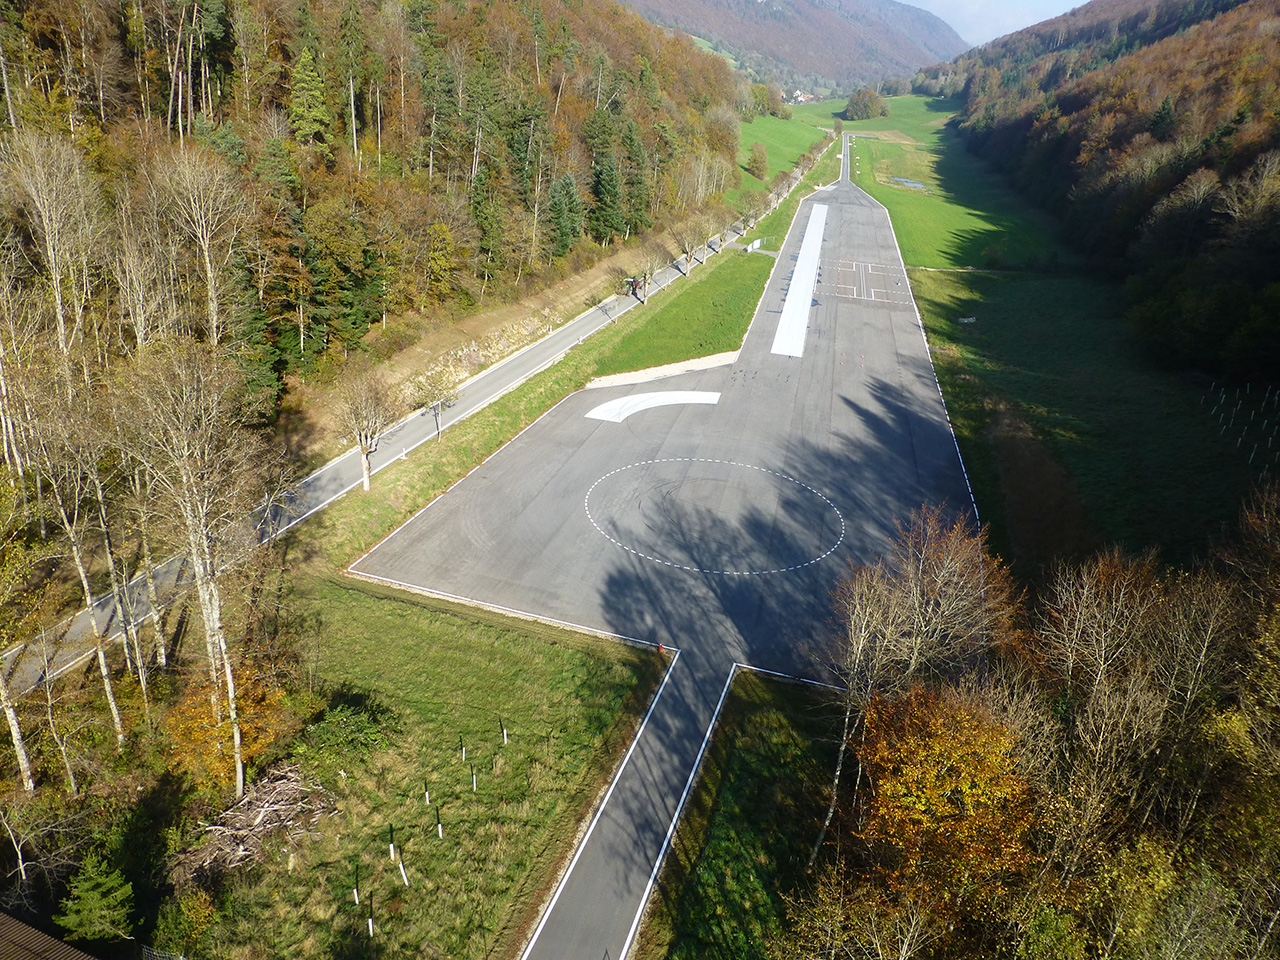 Bird’s eye view of the DTC test track